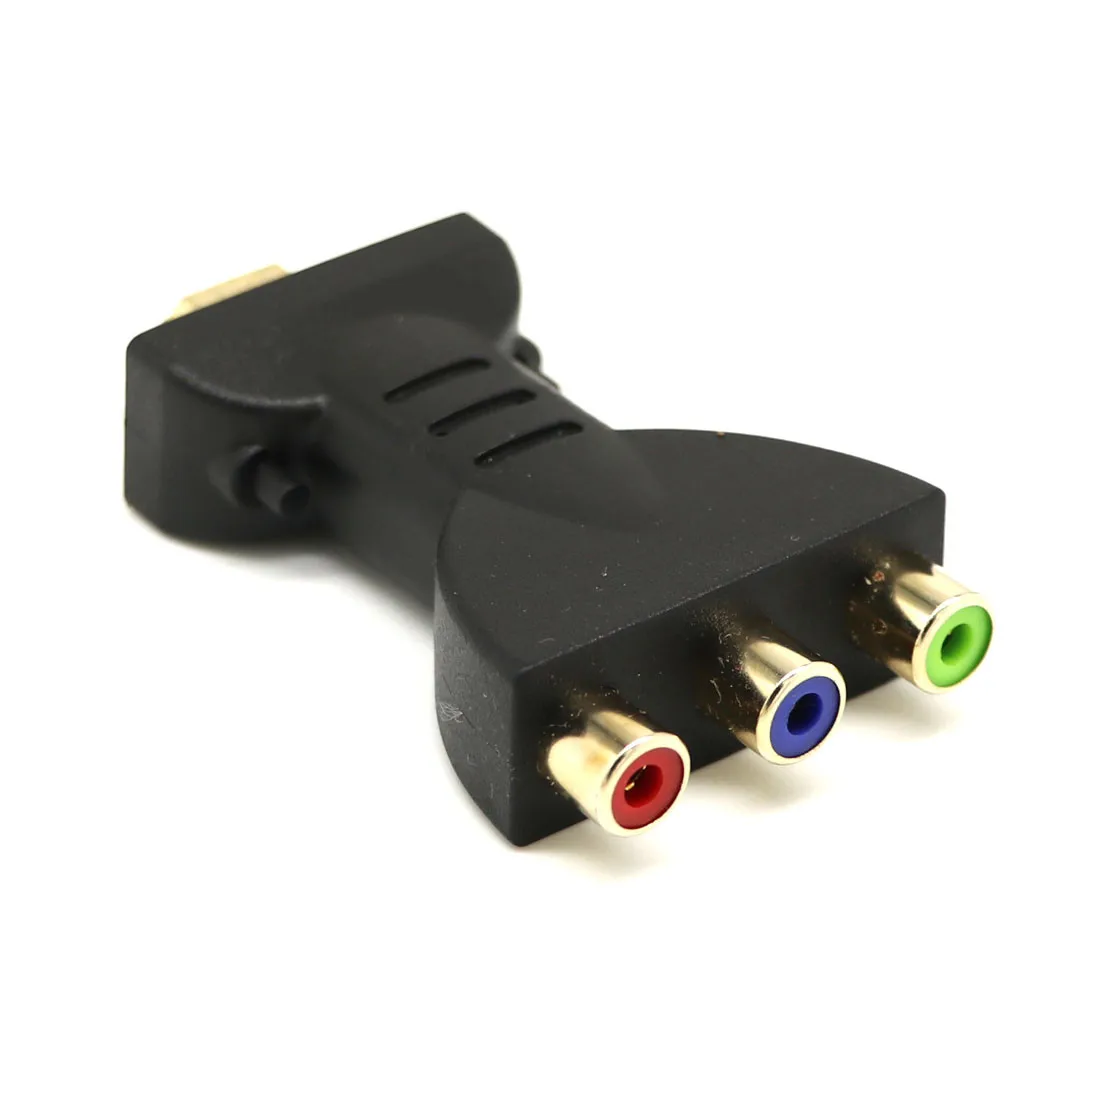 

High Quality Gold-plated HDMI-compatible to 3 RGB RCA Video Audio Adapters AV Component Converters For HDTV DVD Projector #34